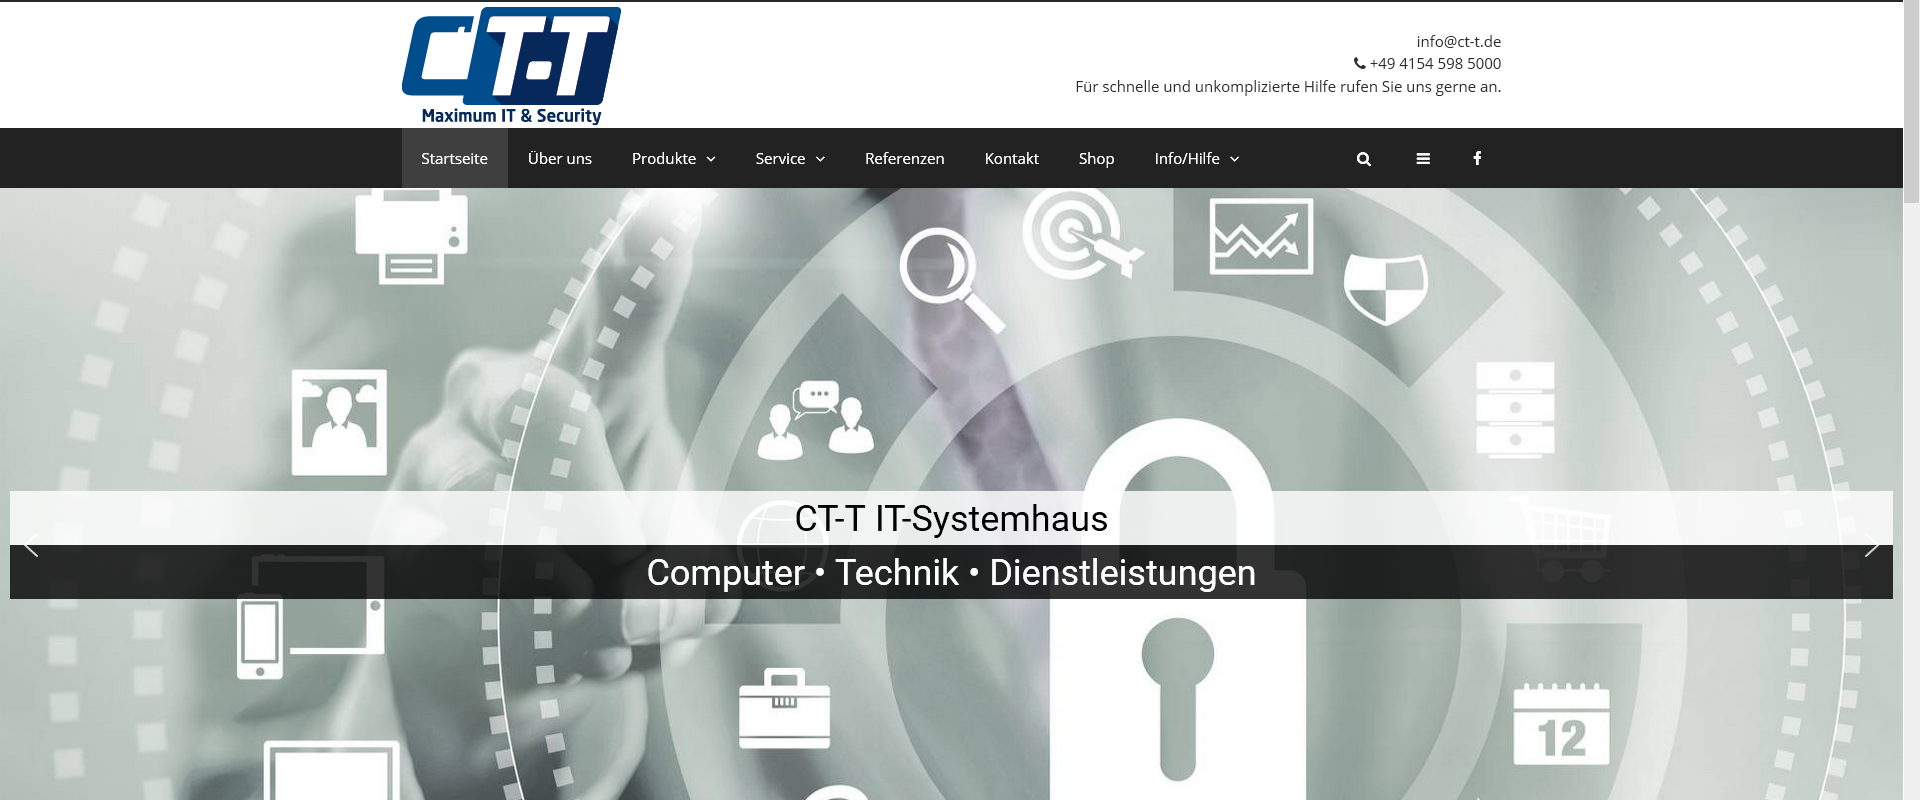 CT-T IT-Systemhaus